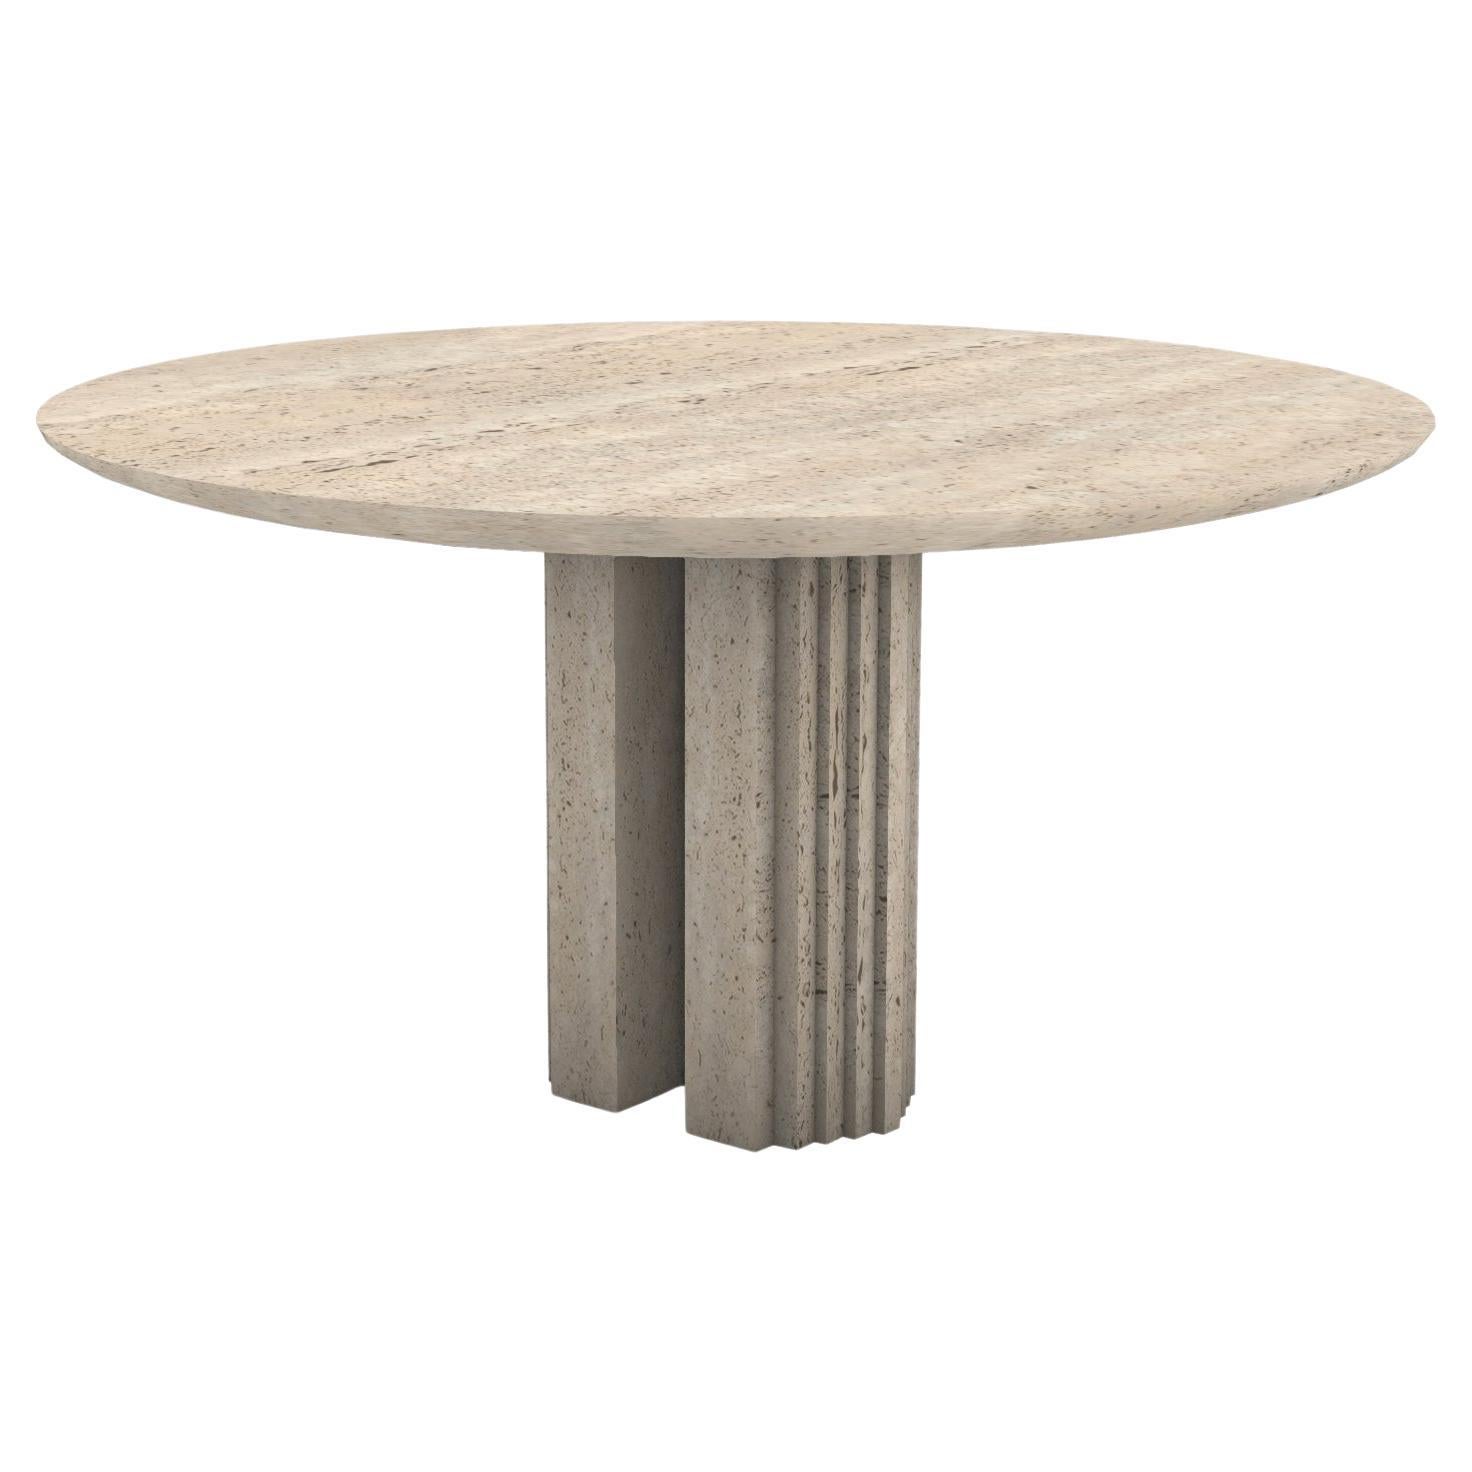 Dining table 0024c in Travertine by artist Desia Ava